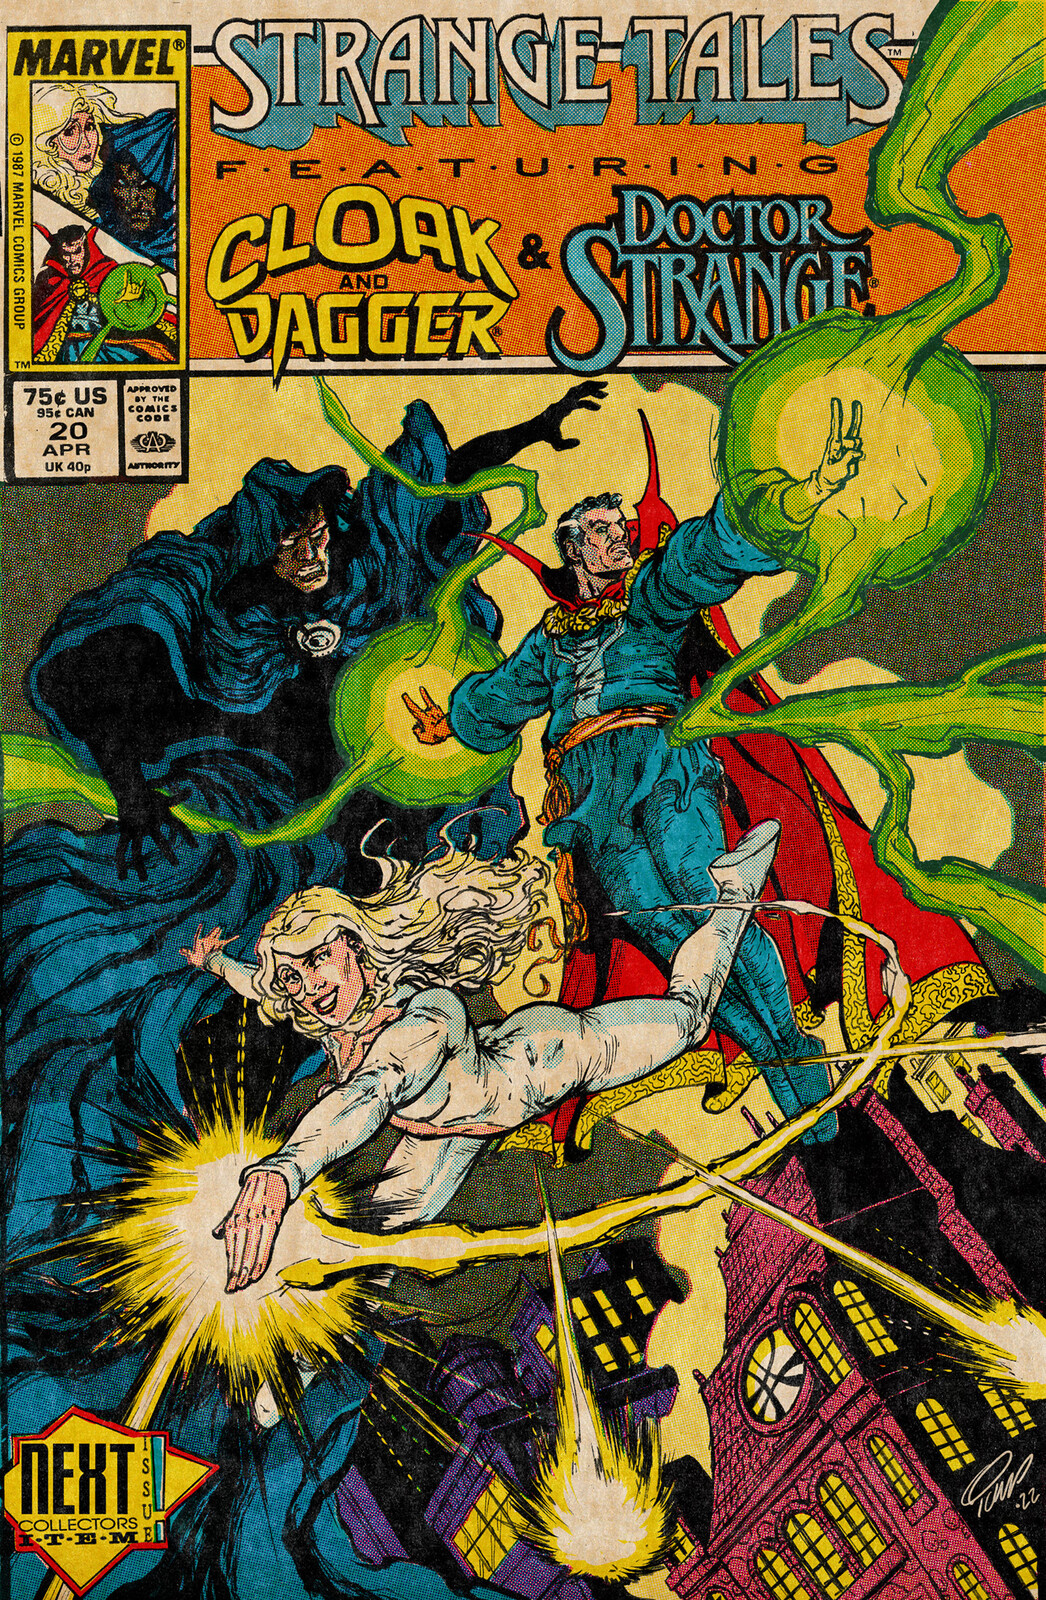 Strange Tales issue twenty cover featuring Dr. Strange as well as Cloak and Dagger. 